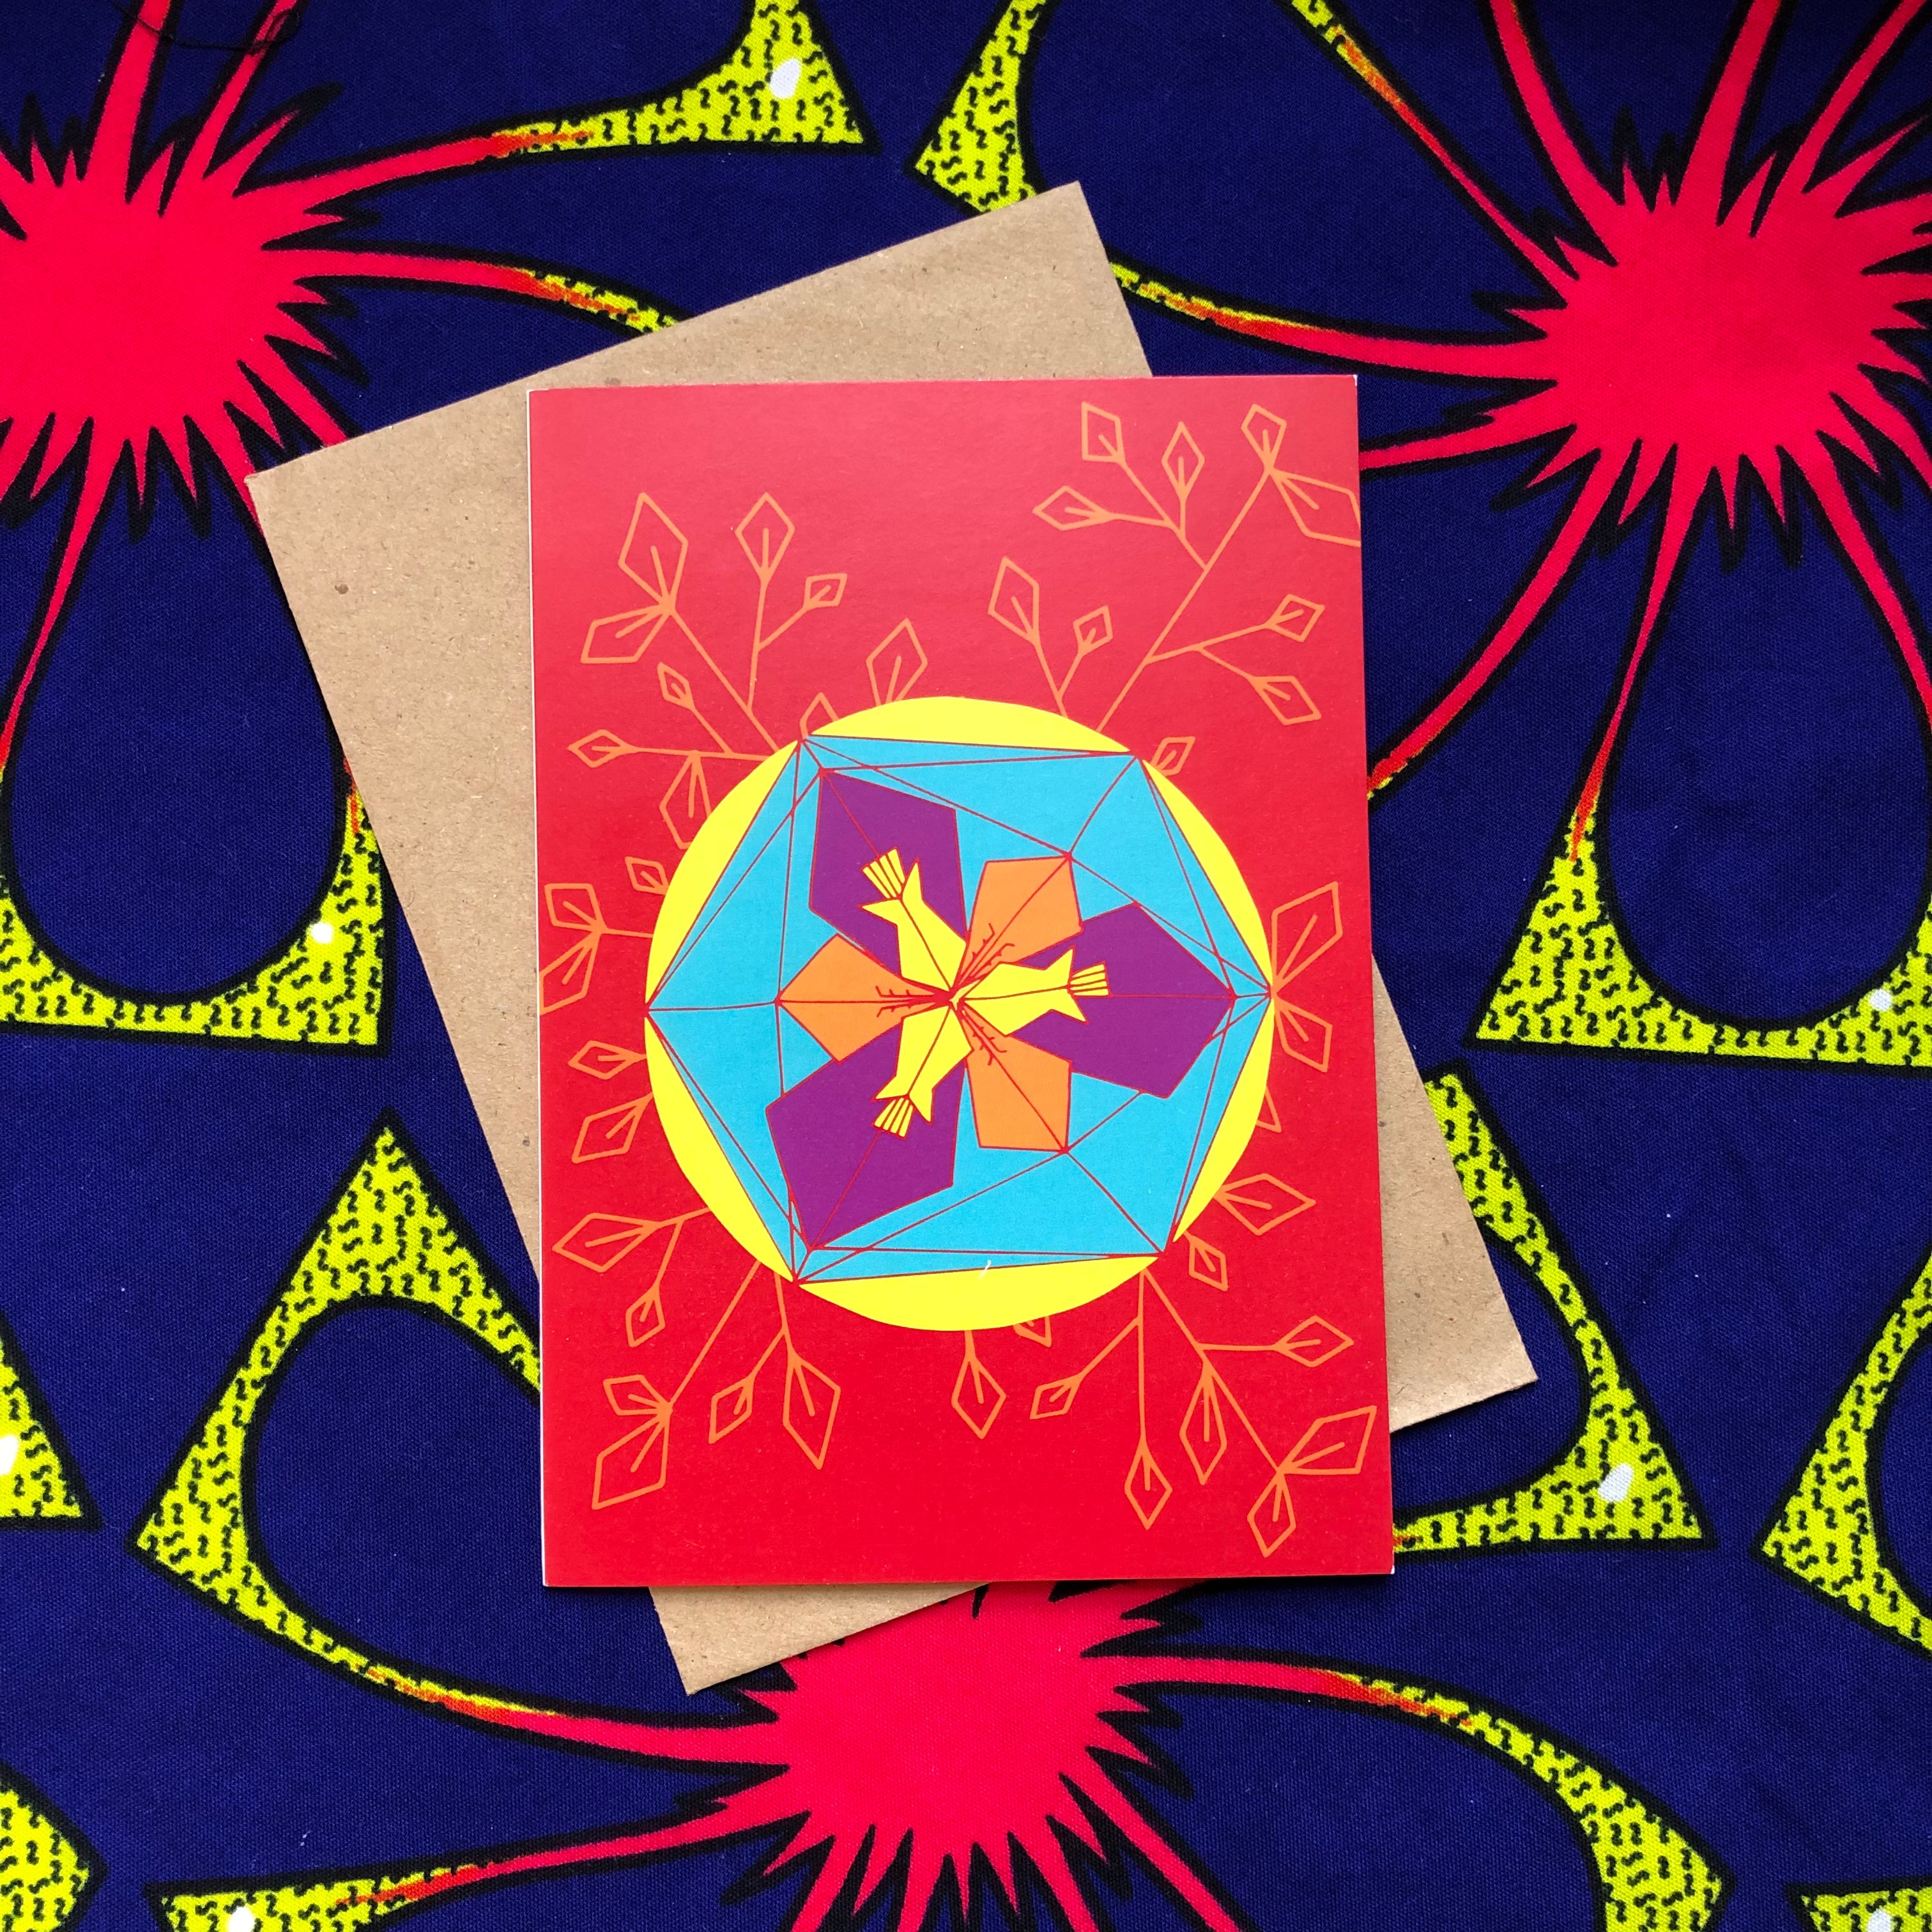 Red greeting card with purple, orange, blue and yellow geometric design.